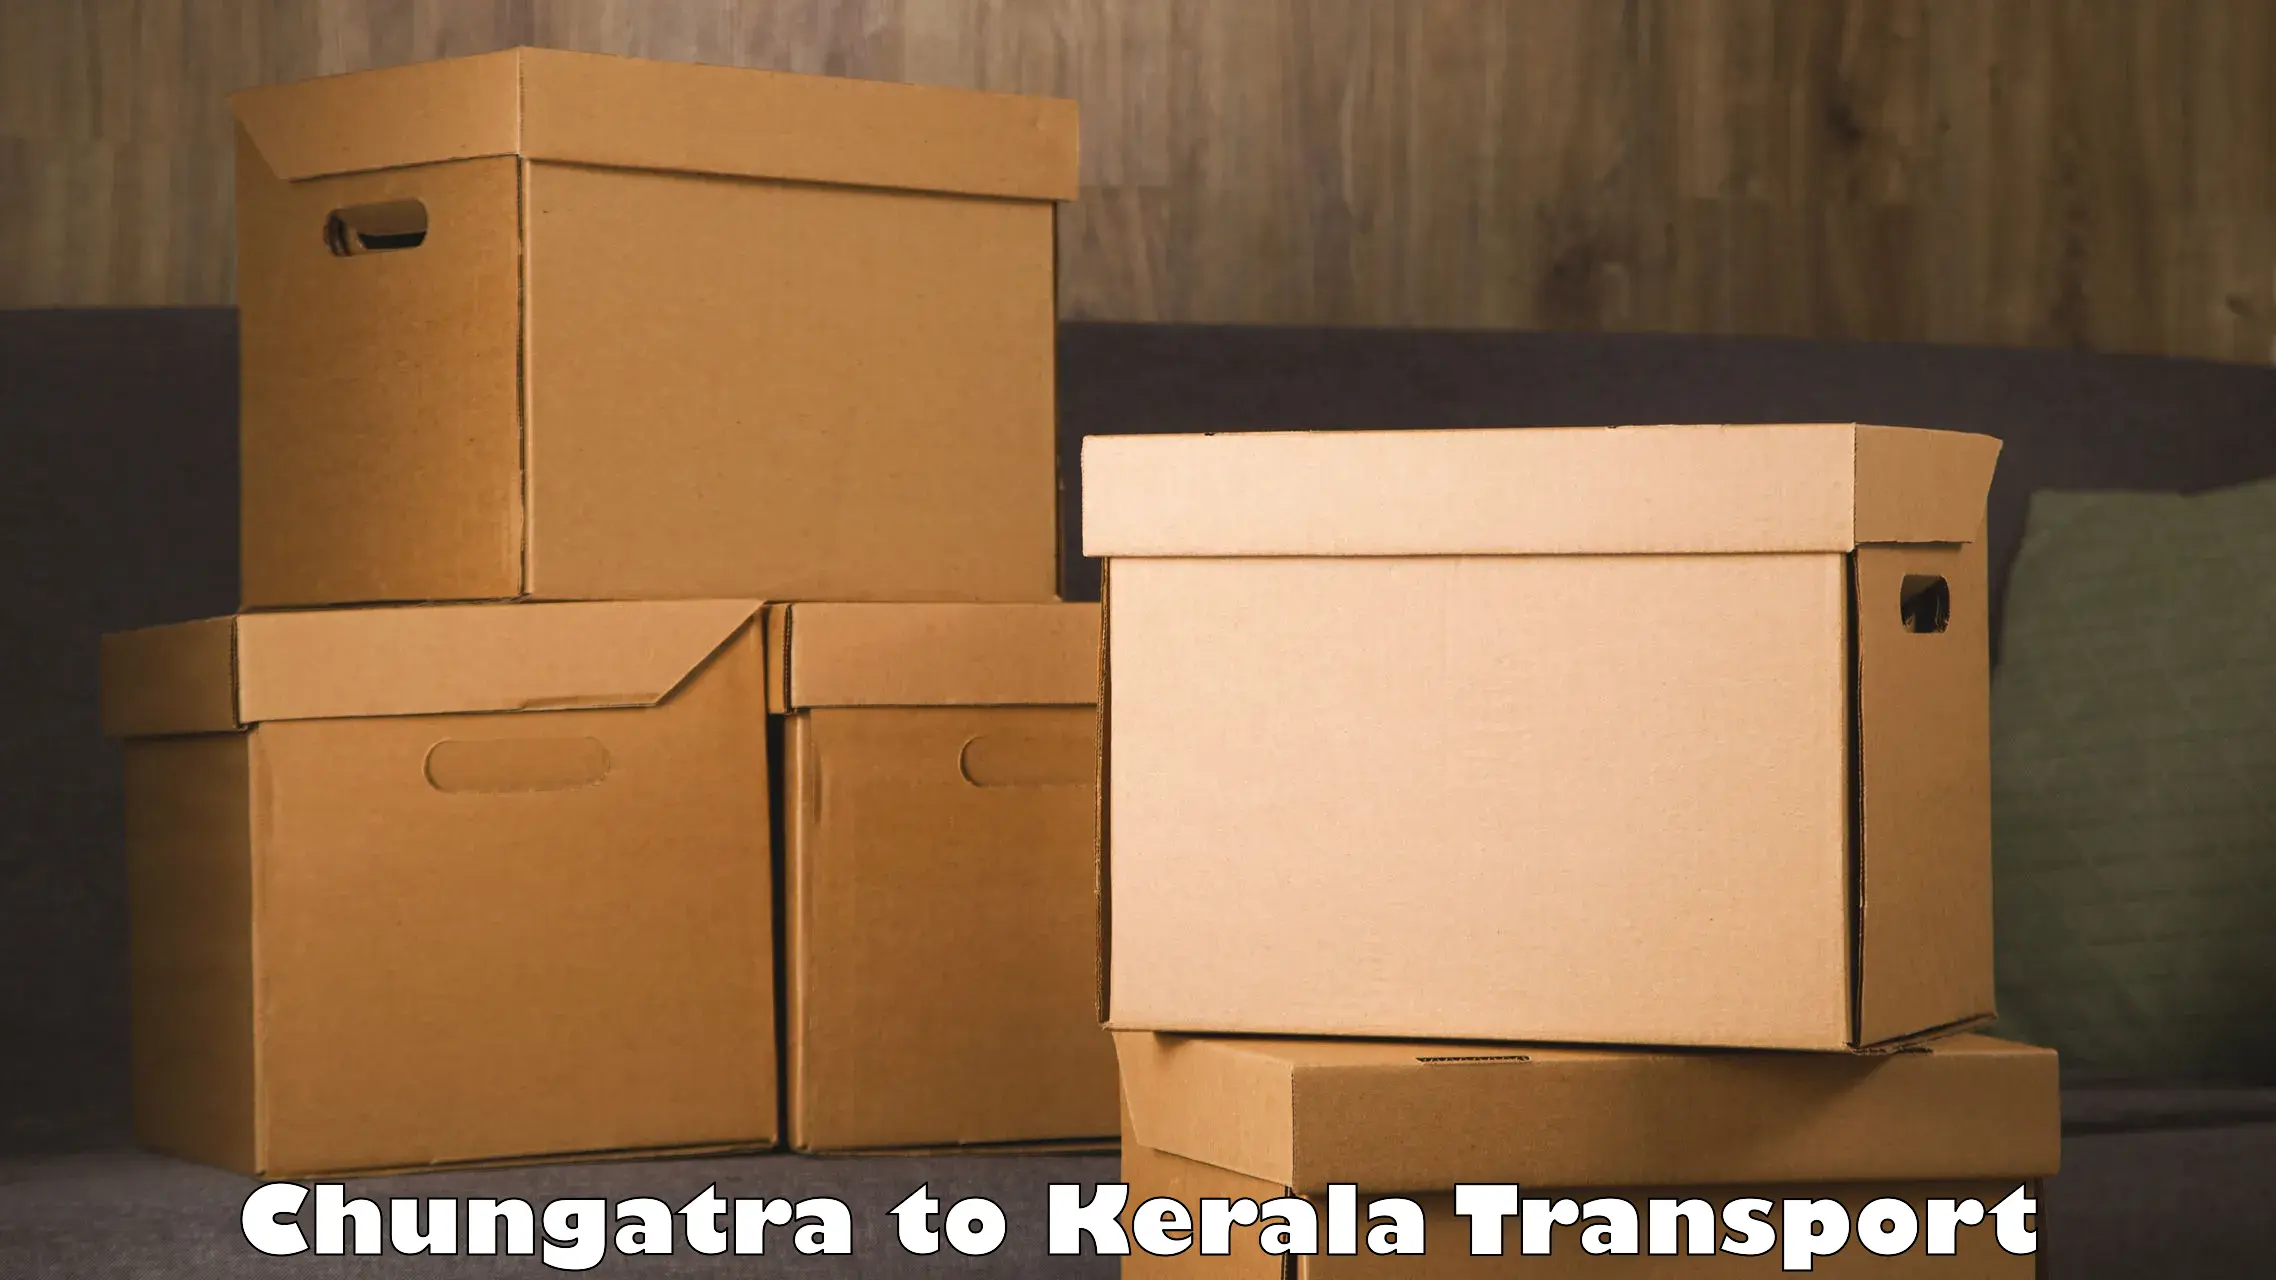 Vehicle transport services Chungatra to Allepey